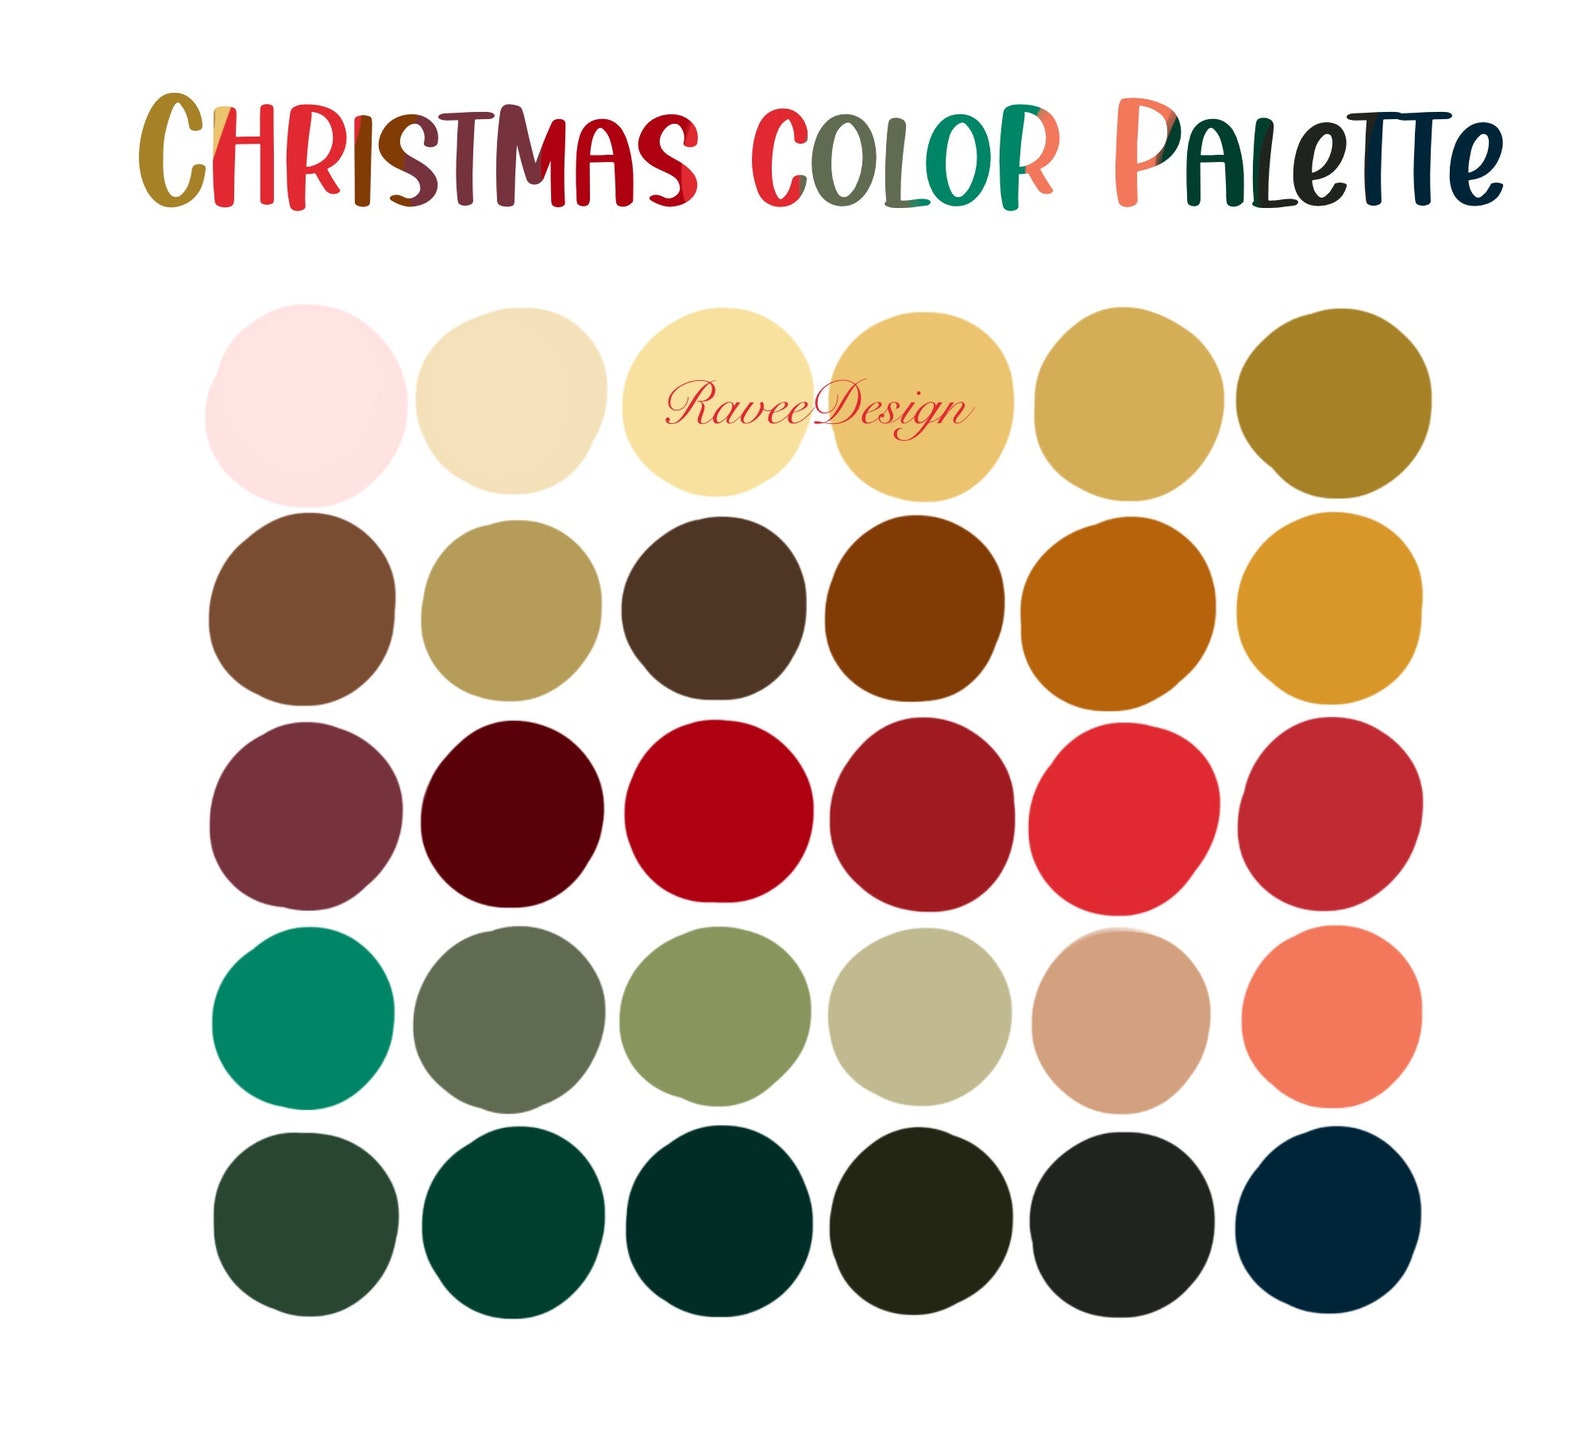 Christmas Color Palette, Swatch Palette for Procreate Palette on iPad